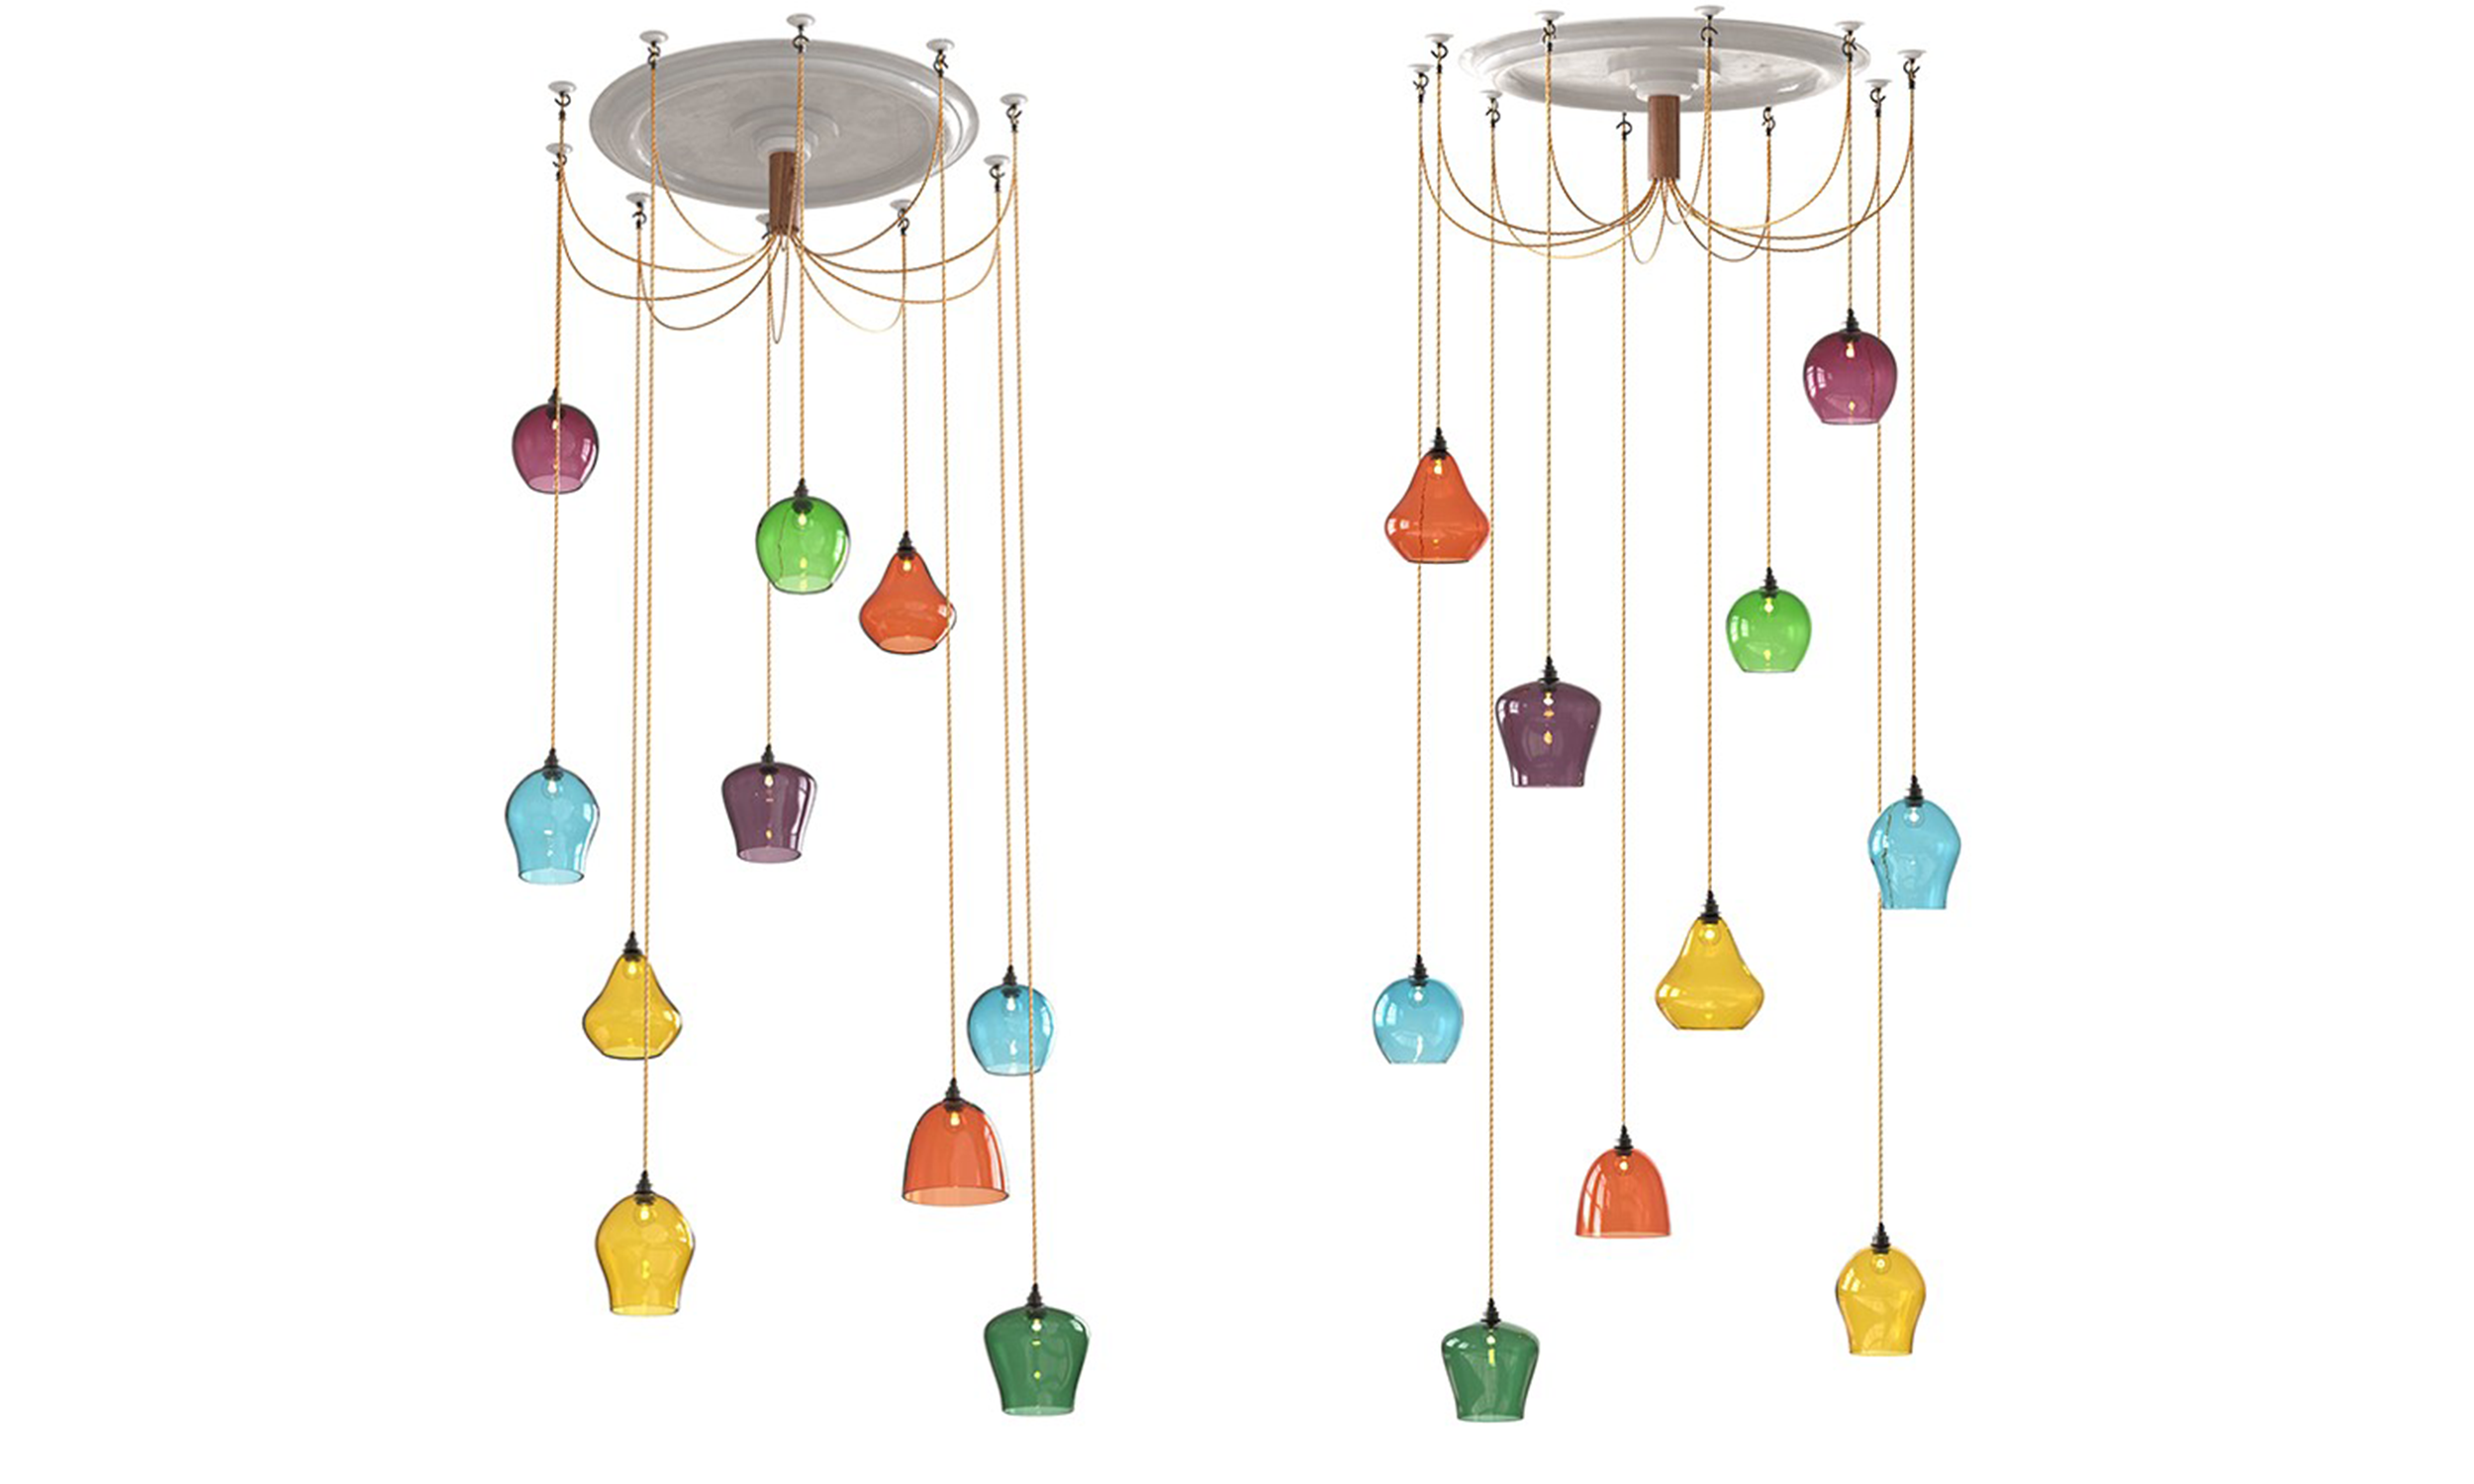 The chandelier features five glass designs in a number of vibrant colours from the Curiousa &amp; Curiousa Classic and Pear Drop ranges.